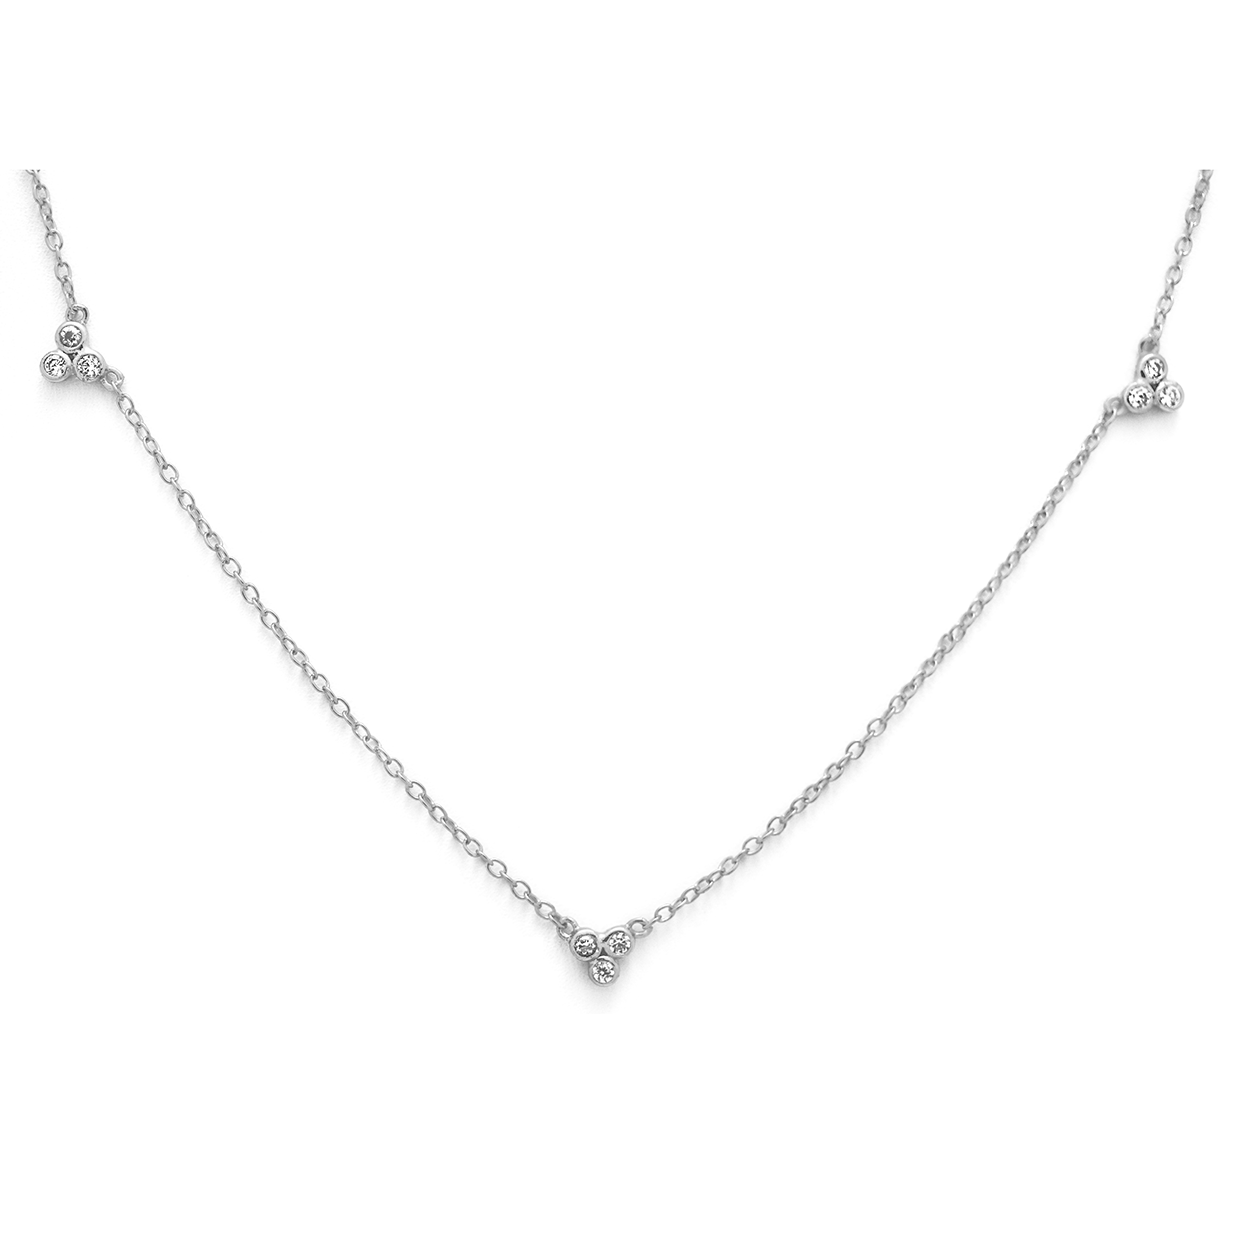 Sterling Silver Necklace with Triple Set Cubic Zirconia Charms